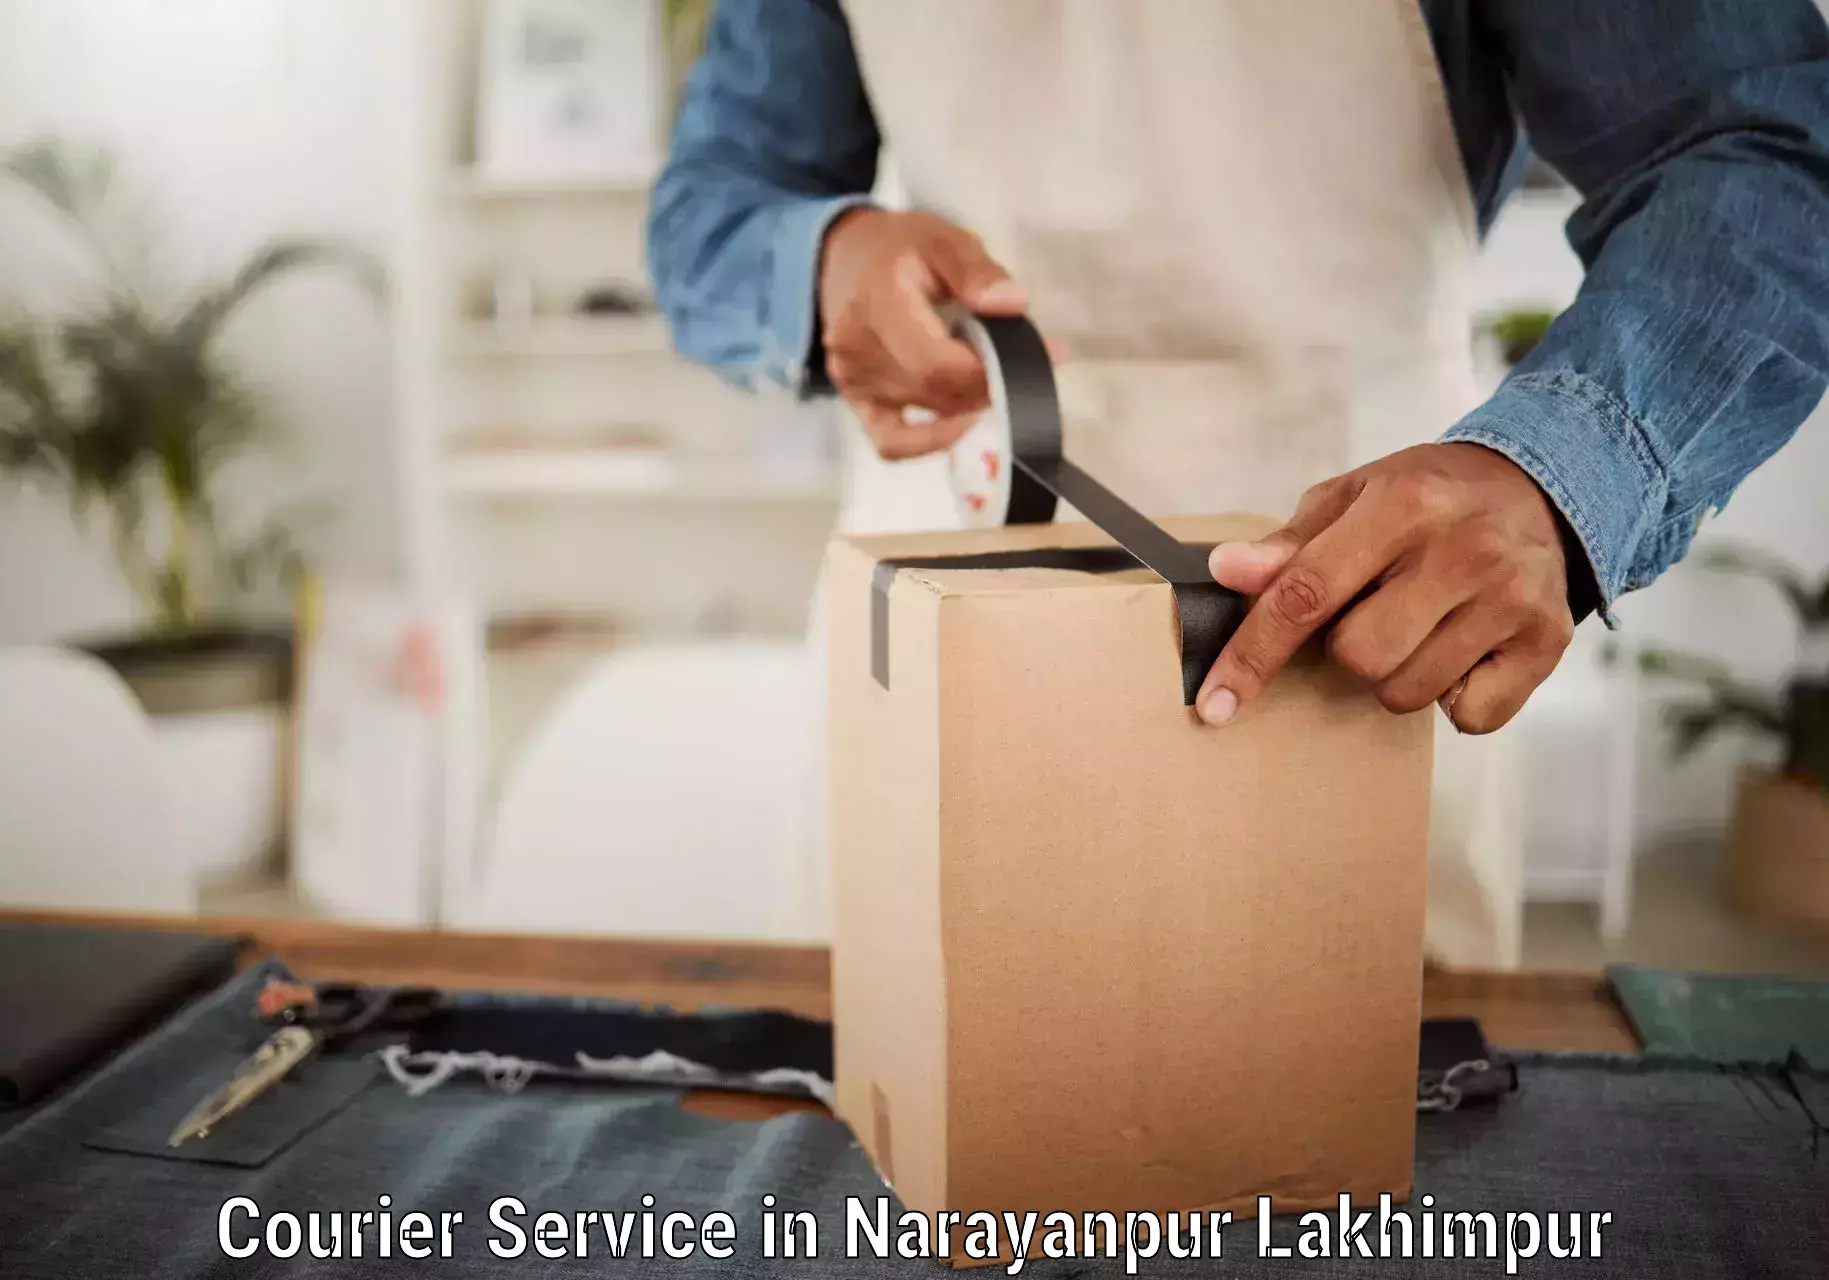 Flexible courier rates in Narayanpur Lakhimpur